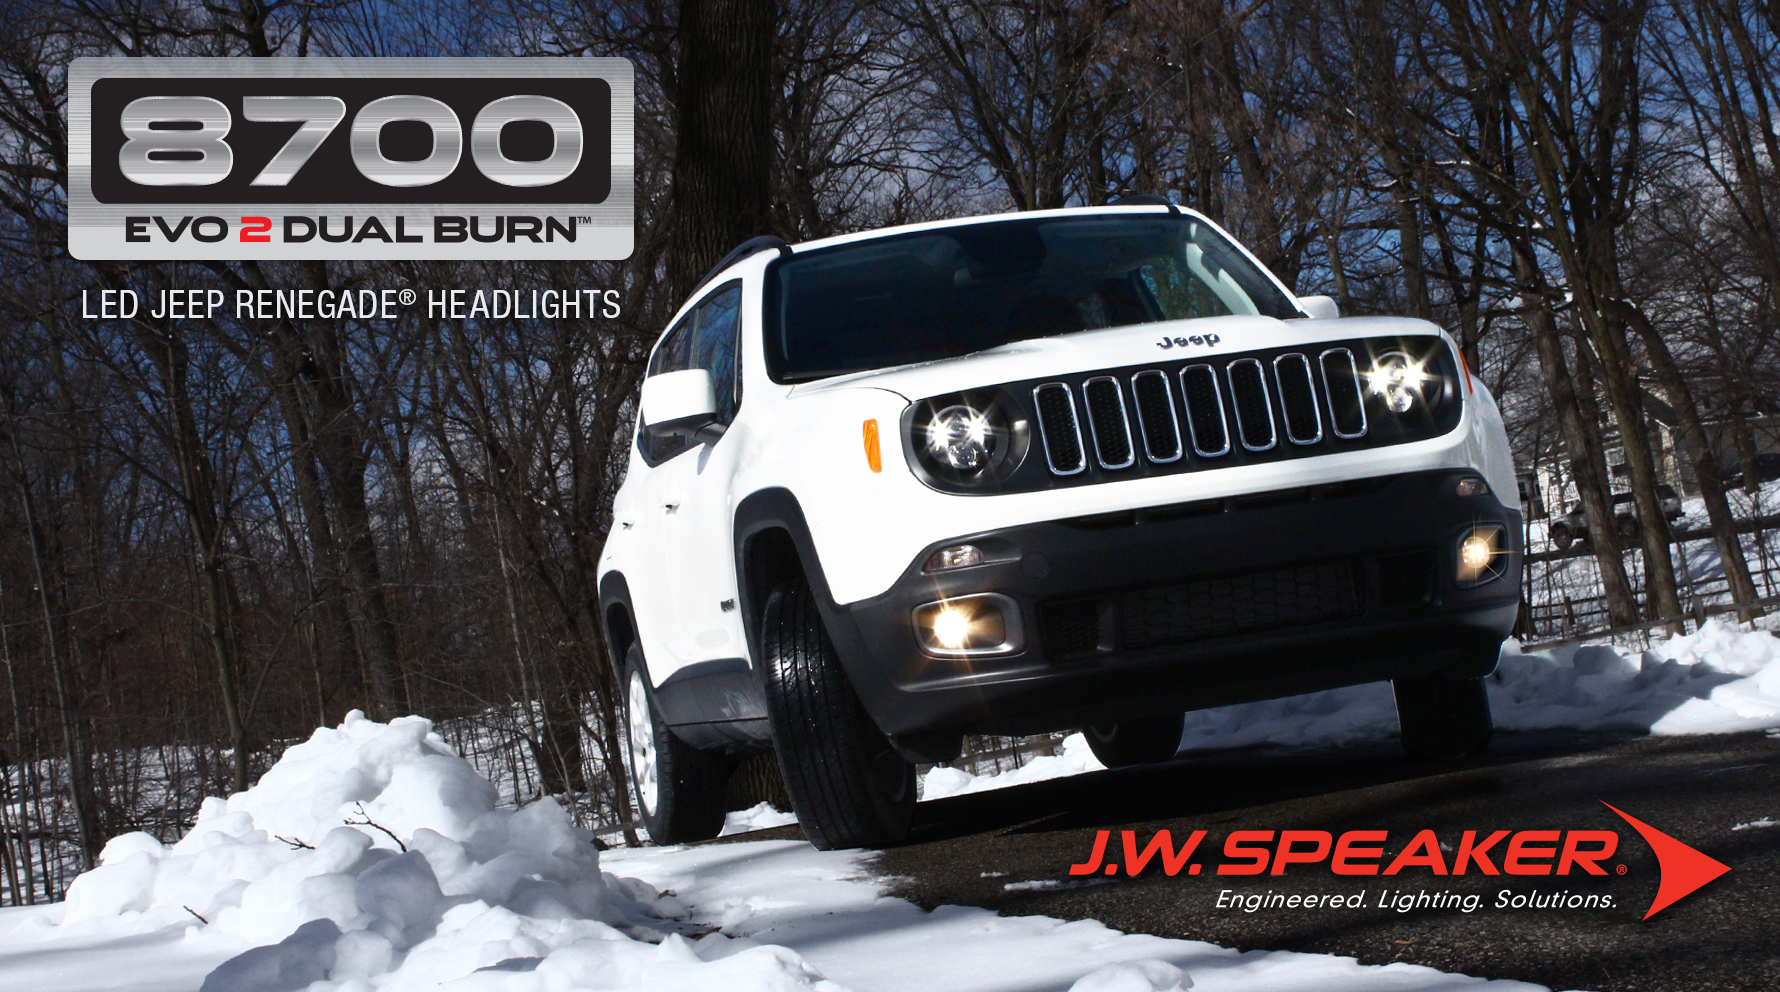 J.W. Speaker is the first to offer a LED headlight upgrade option for the Jeep Renegade!